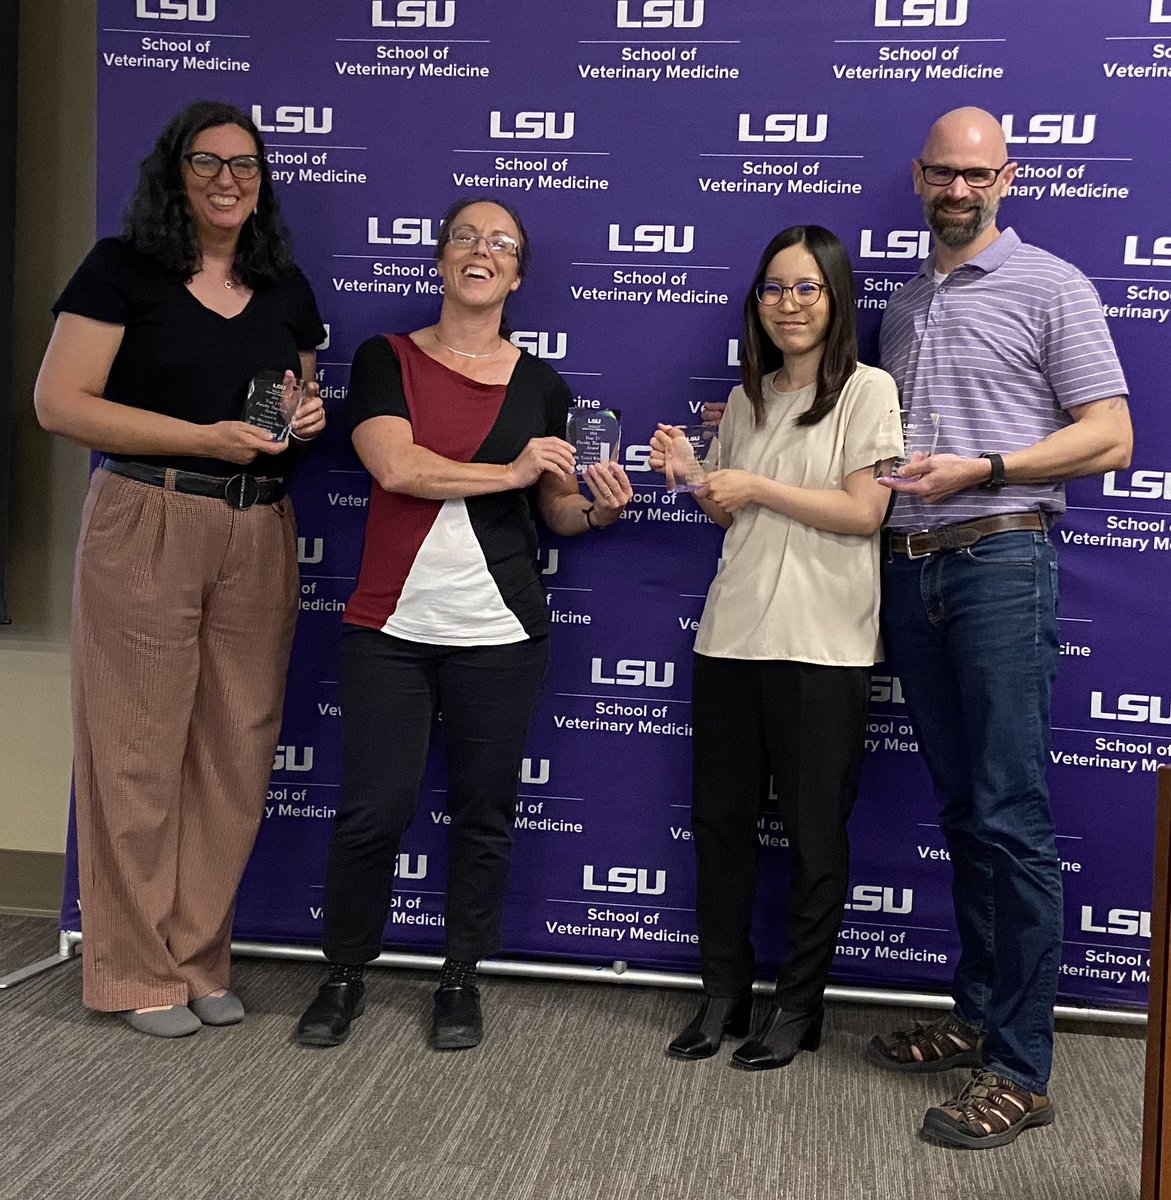 I’m thrilled to be at our annual Faculty & Staff Awards Ceremony this afternoon. Our biggest strength @LSUVetMed is our incredibly talented, dedicated, & compassionate people. My warmest congratulations to all our wonderful awardees. #LSU #BetteringLives #ScholarshipFirst #WeLead